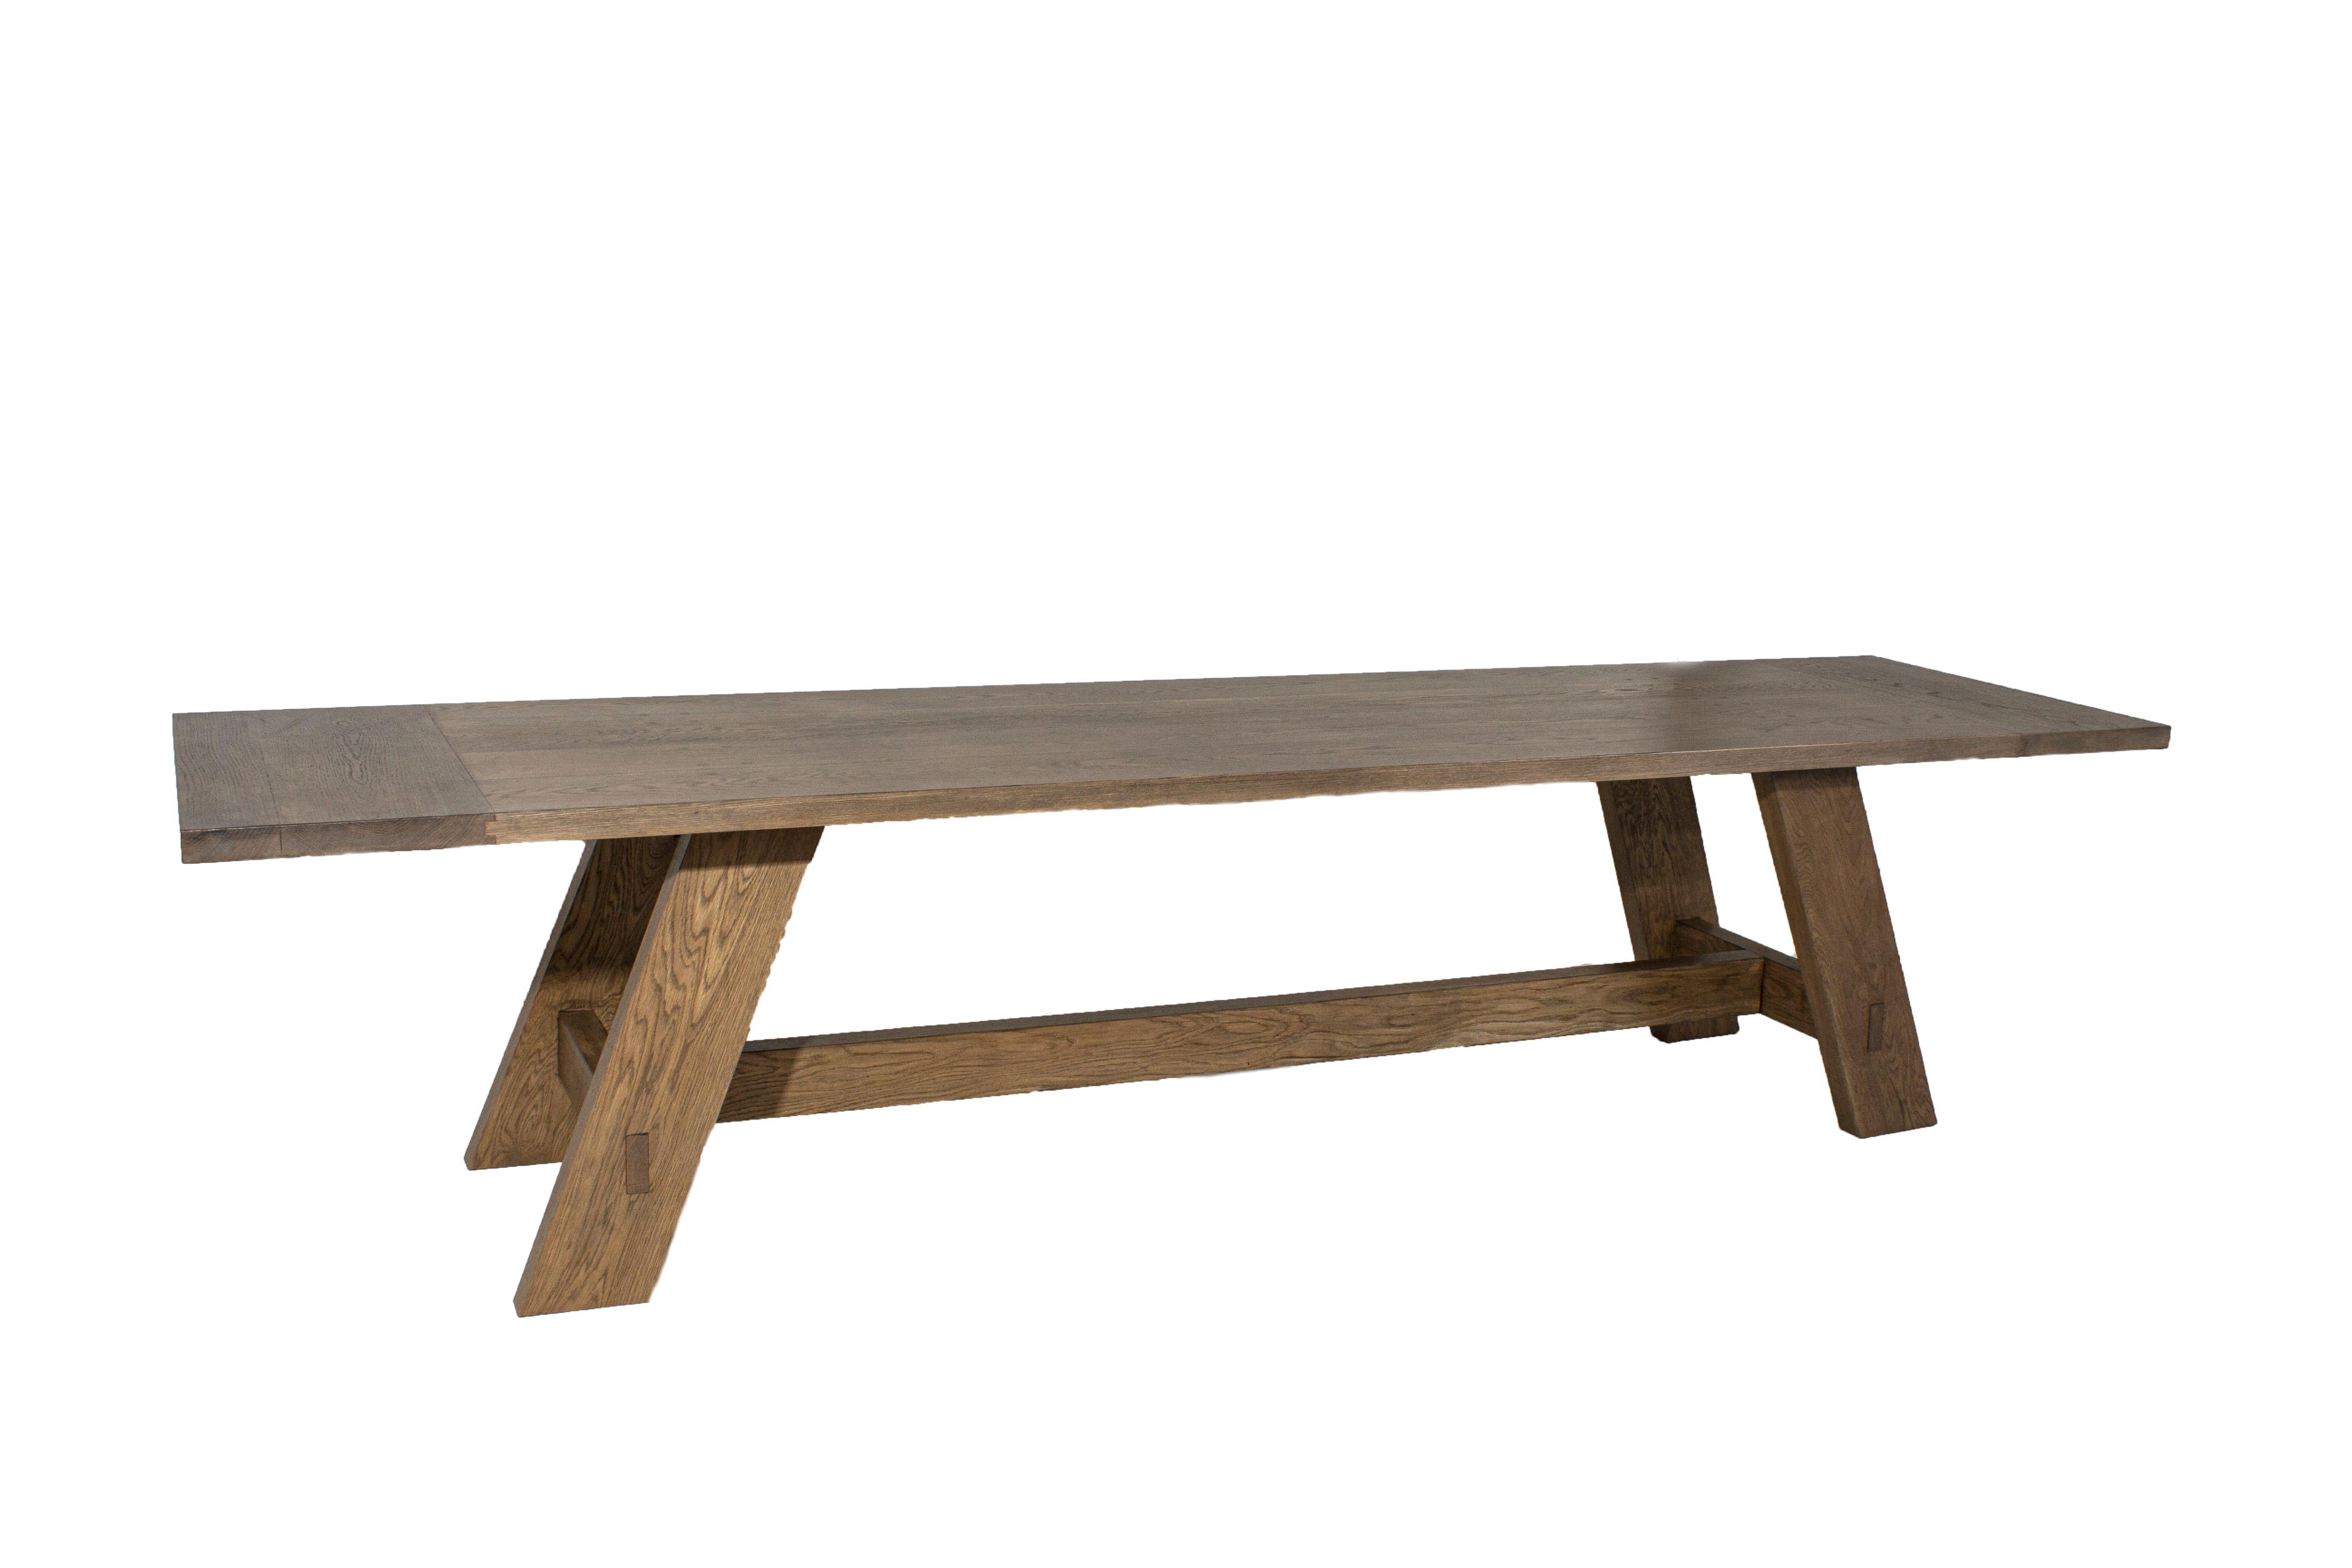 Bennett dining table

Reclaimed white oak dining table

Designed by Brendan Bass for the Vision and Design Collection, by using high quality materials and textures. All materials are sourced from local vendors throughout the state of Texas. The